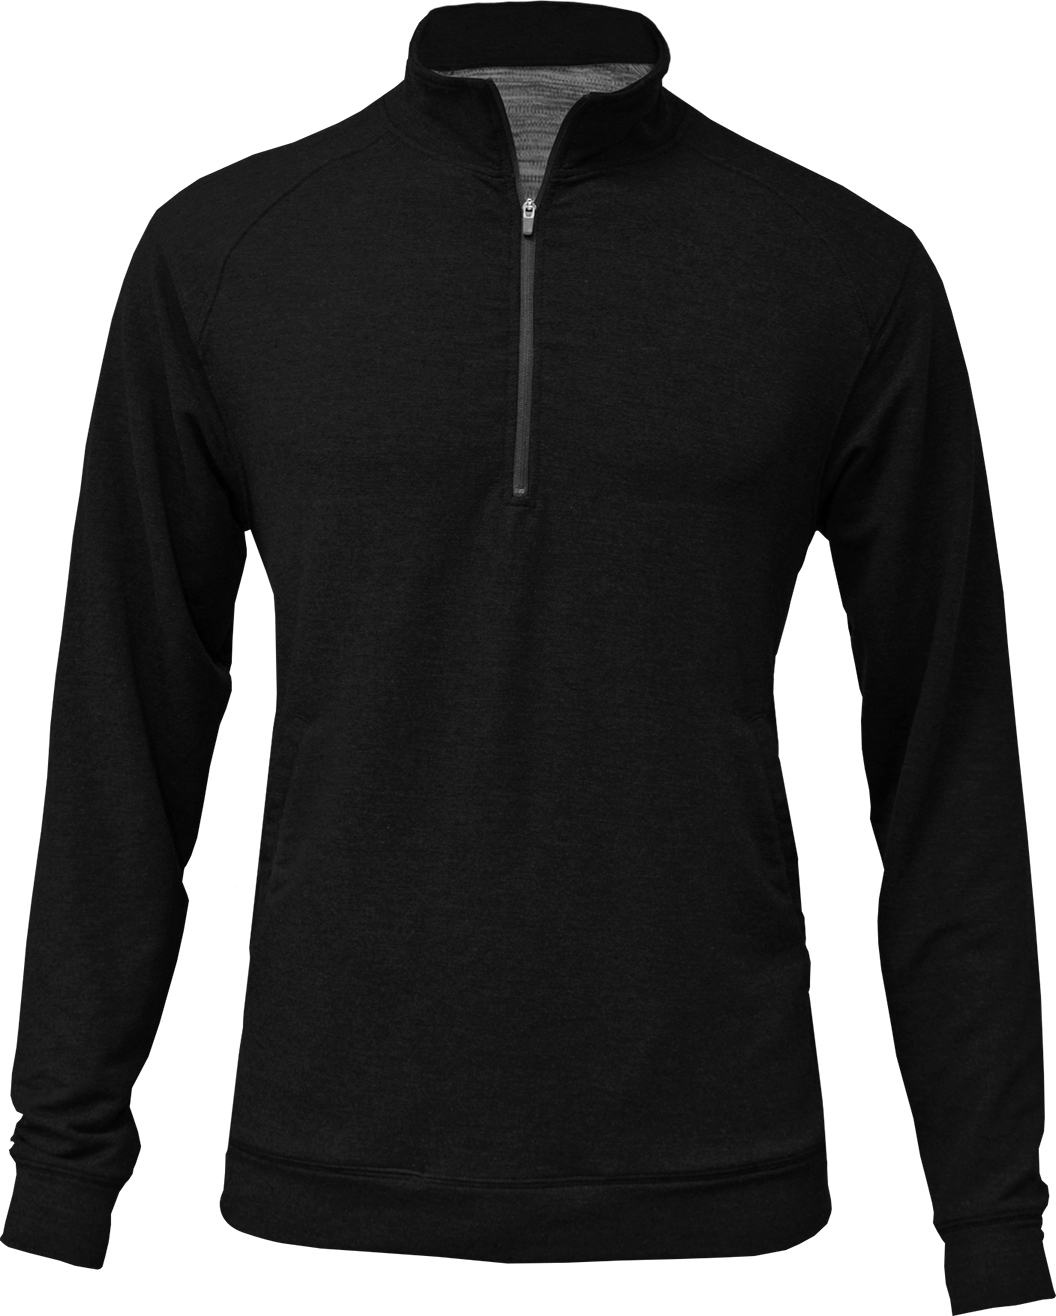 BAW Athletic Wear F725 - Adult Tri-Blend 1/4 Zip Pullover